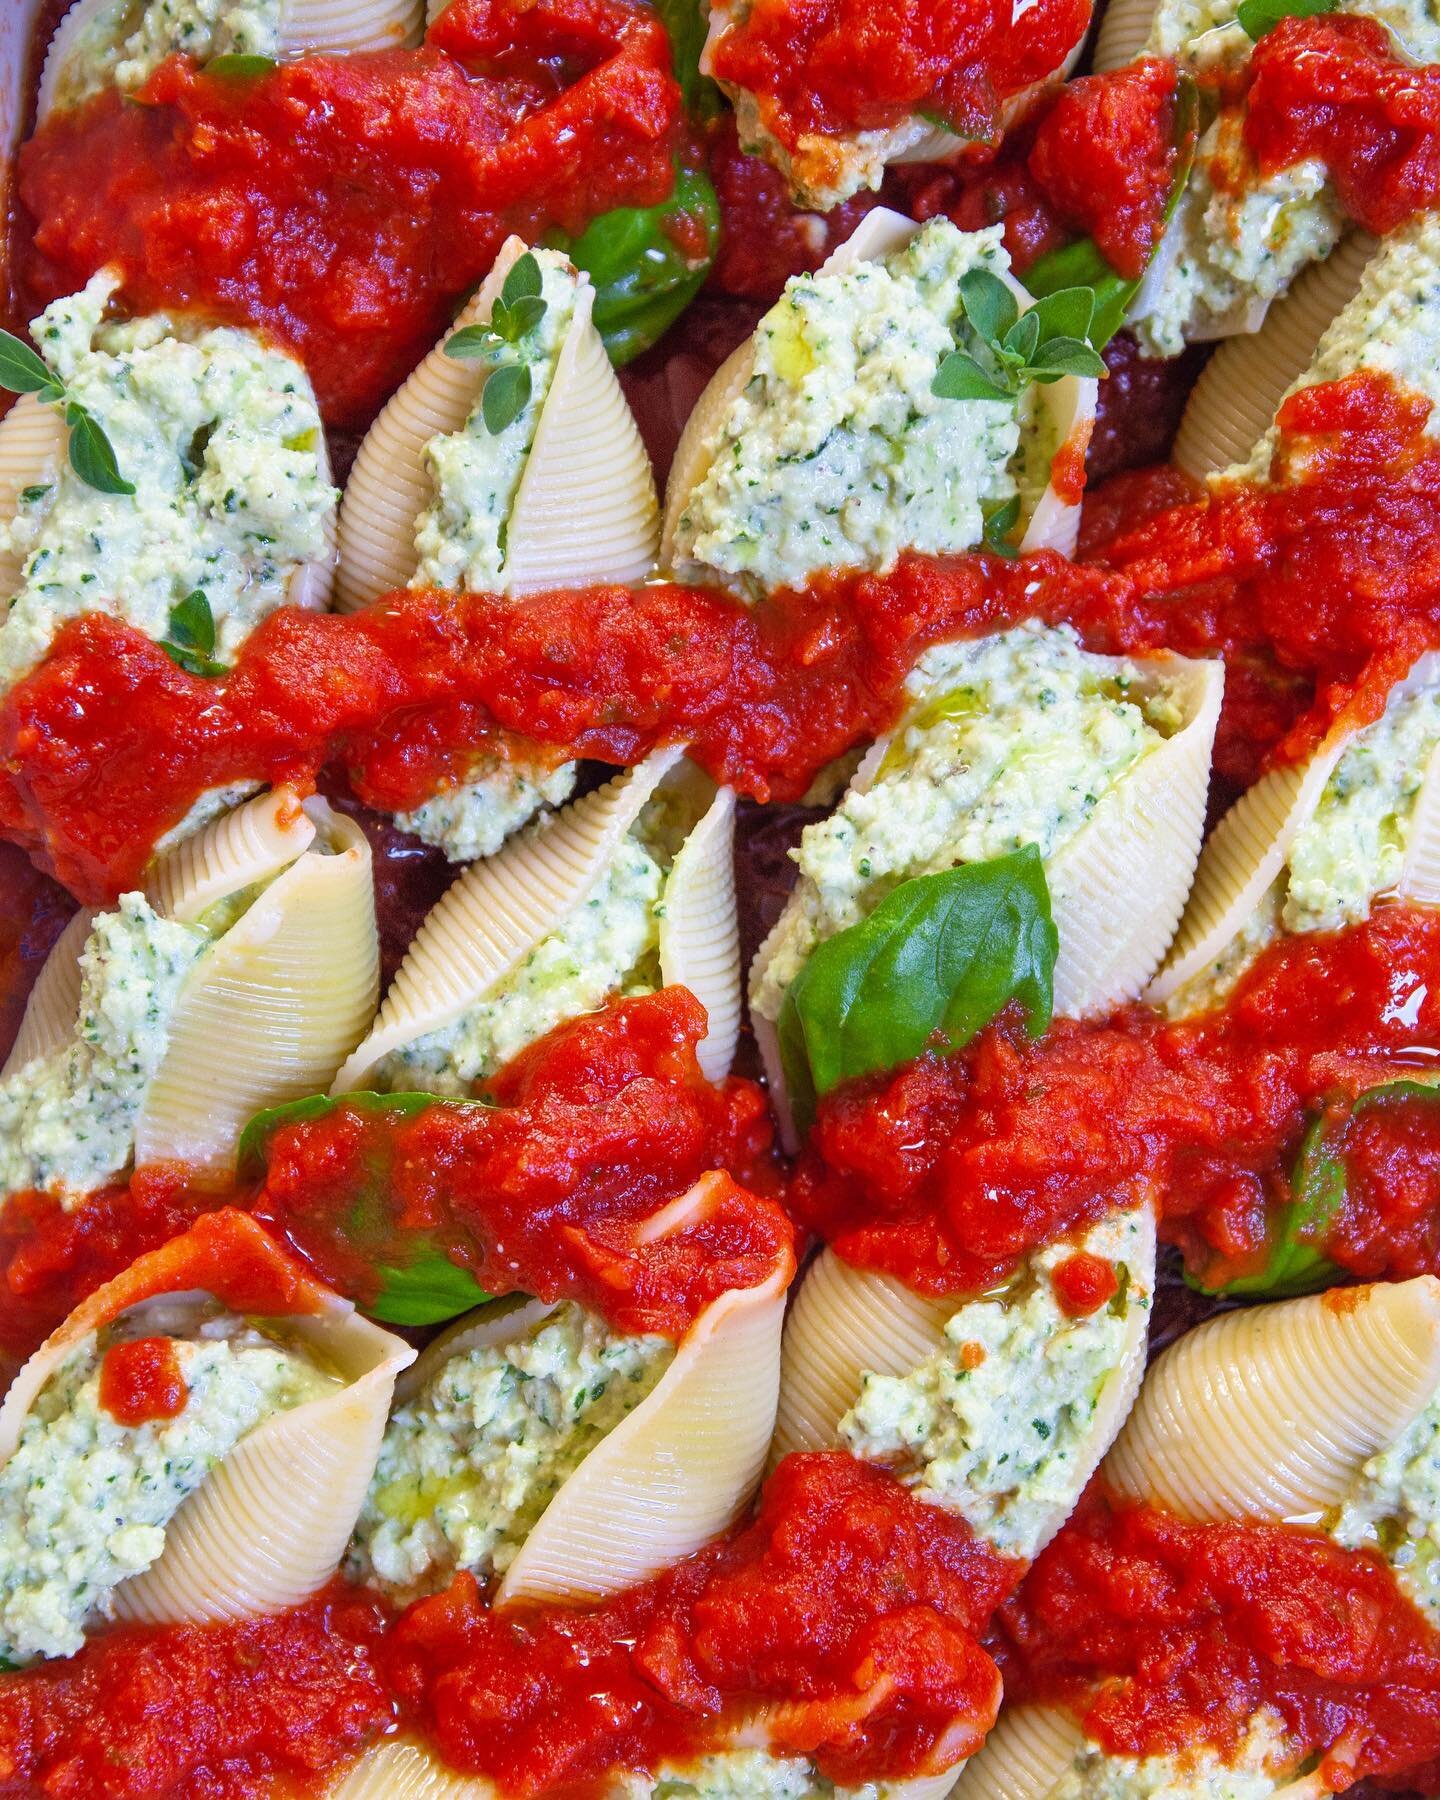 Stuffed Shells, filled with herb almond ricotta.🔥
&bull;
So, yesterday I asked you what I should be for halloween. I got some great suggestions&mdash;most of which were &ldquo;sexy&rdquo; costumes and then I got my favorite response. &ldquo;A stuffe